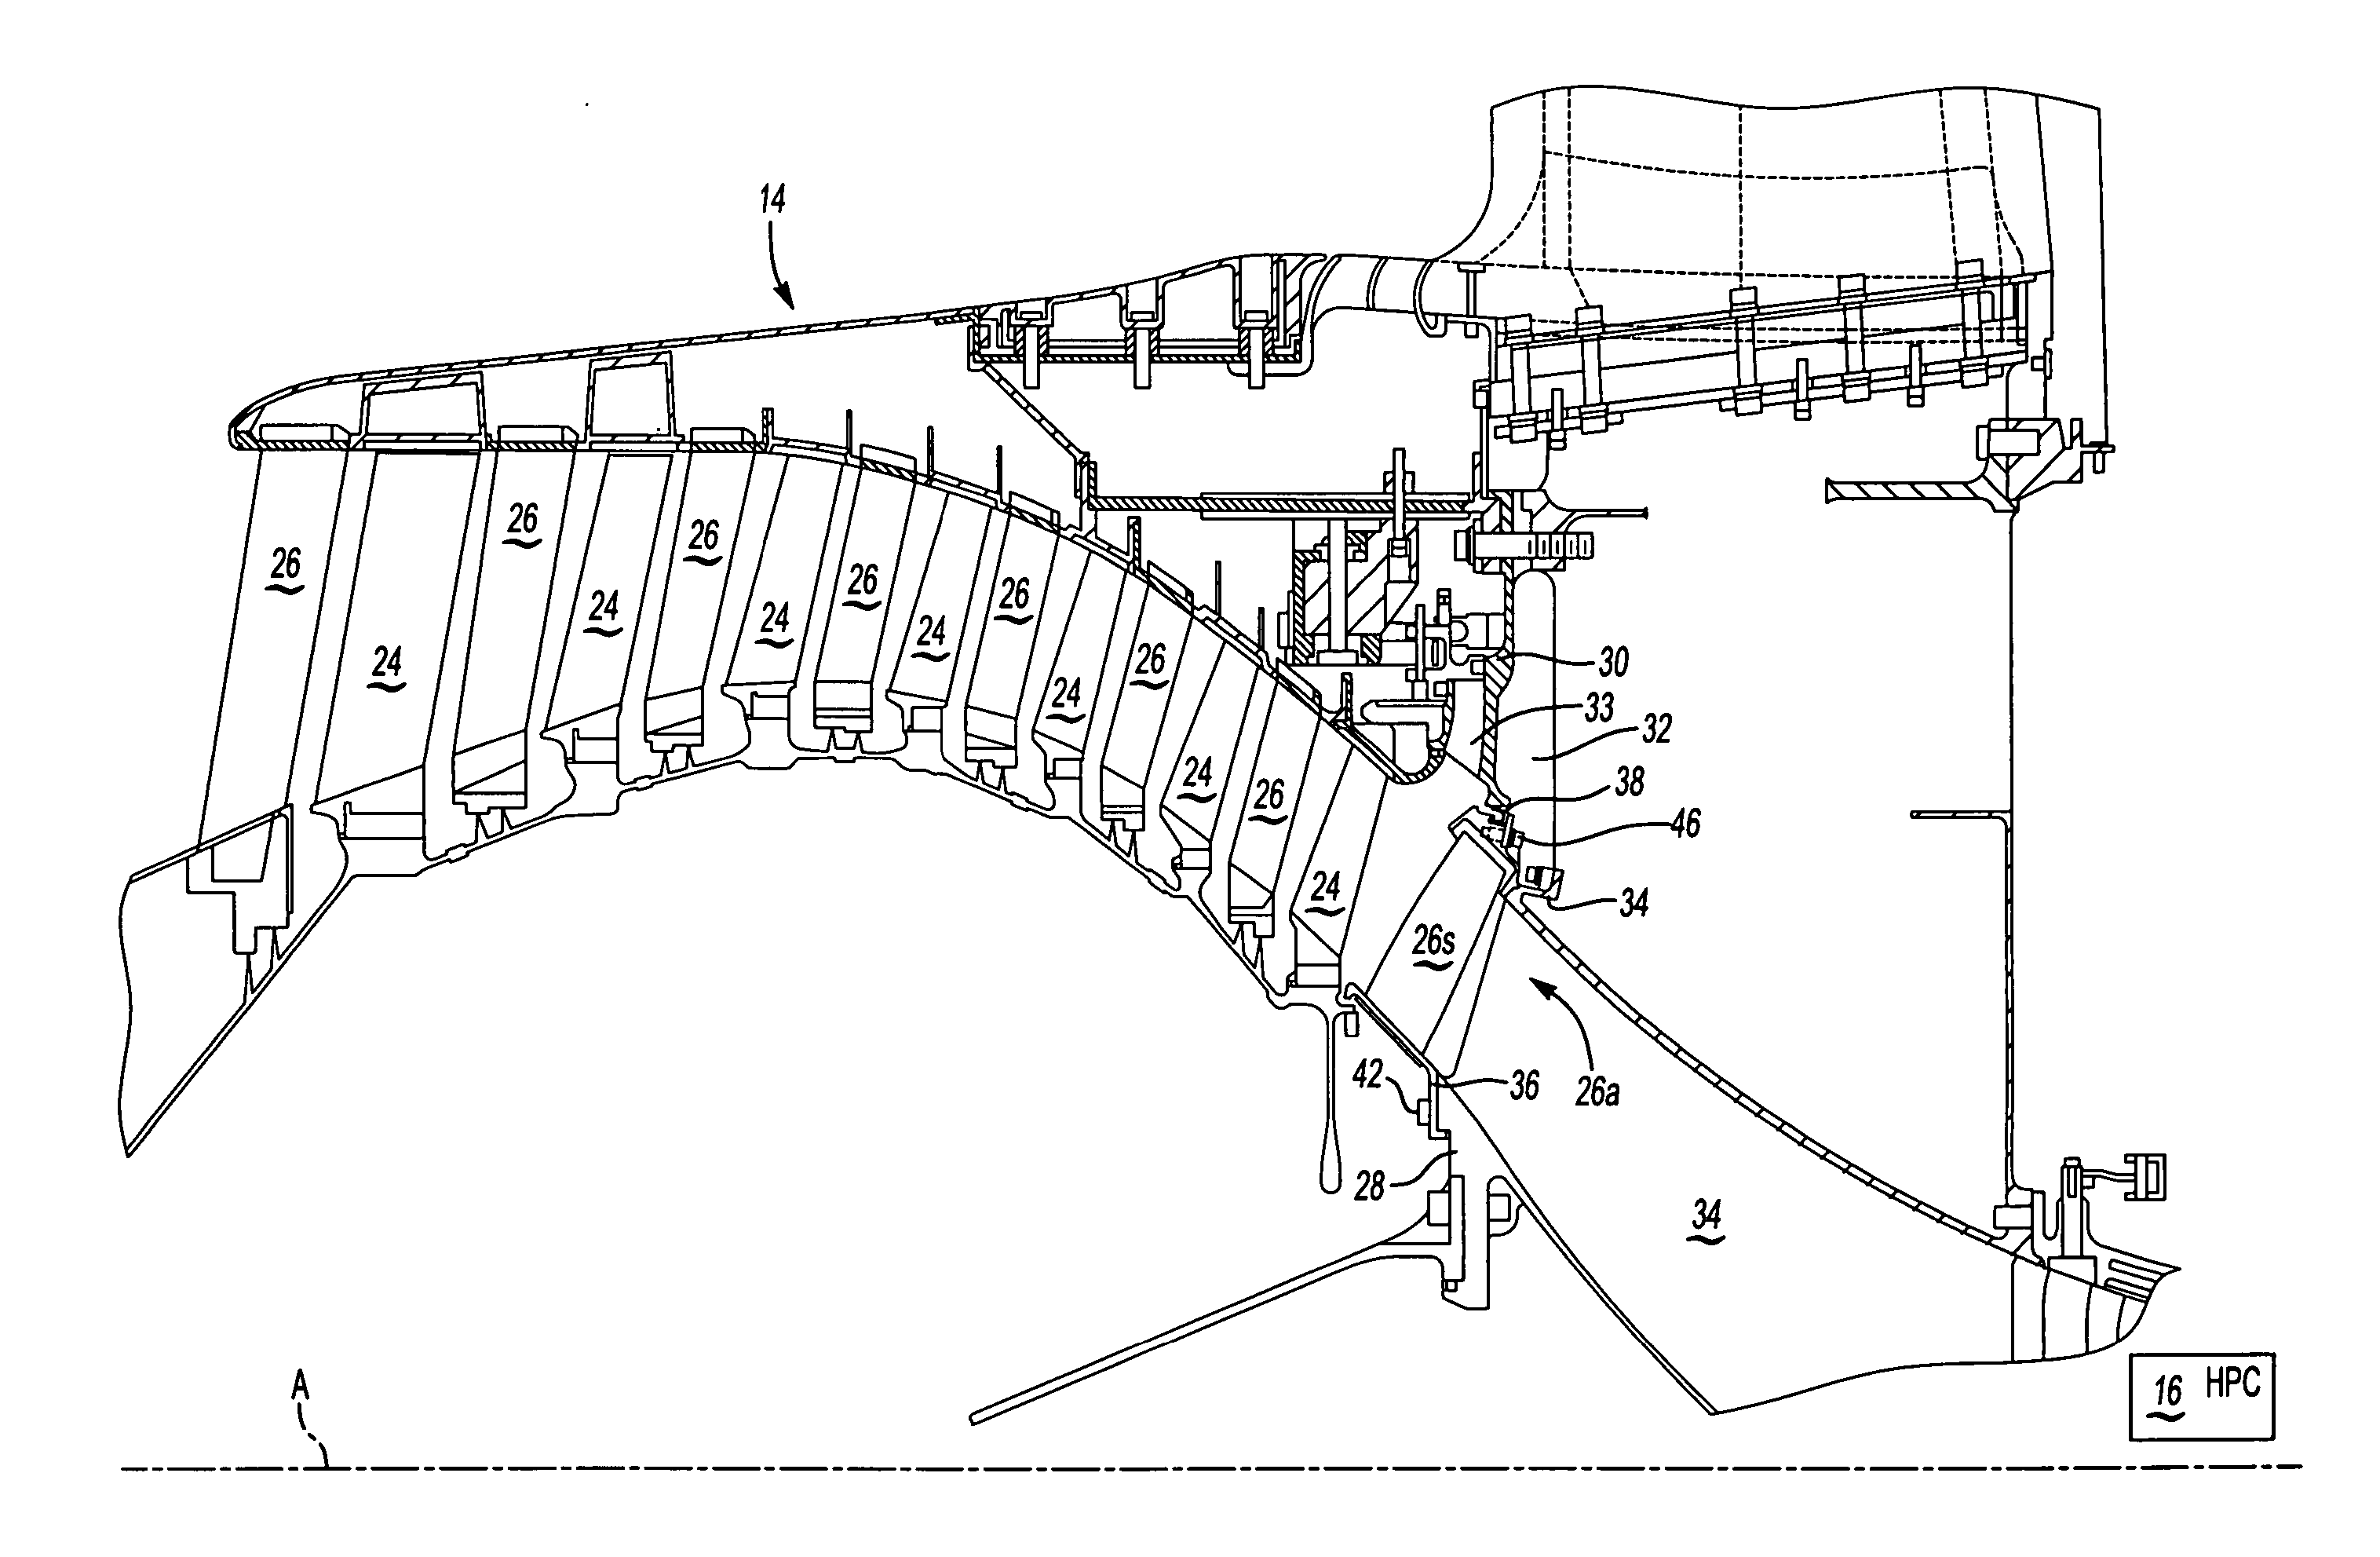 Stator vane assembly for a gas turbine engine